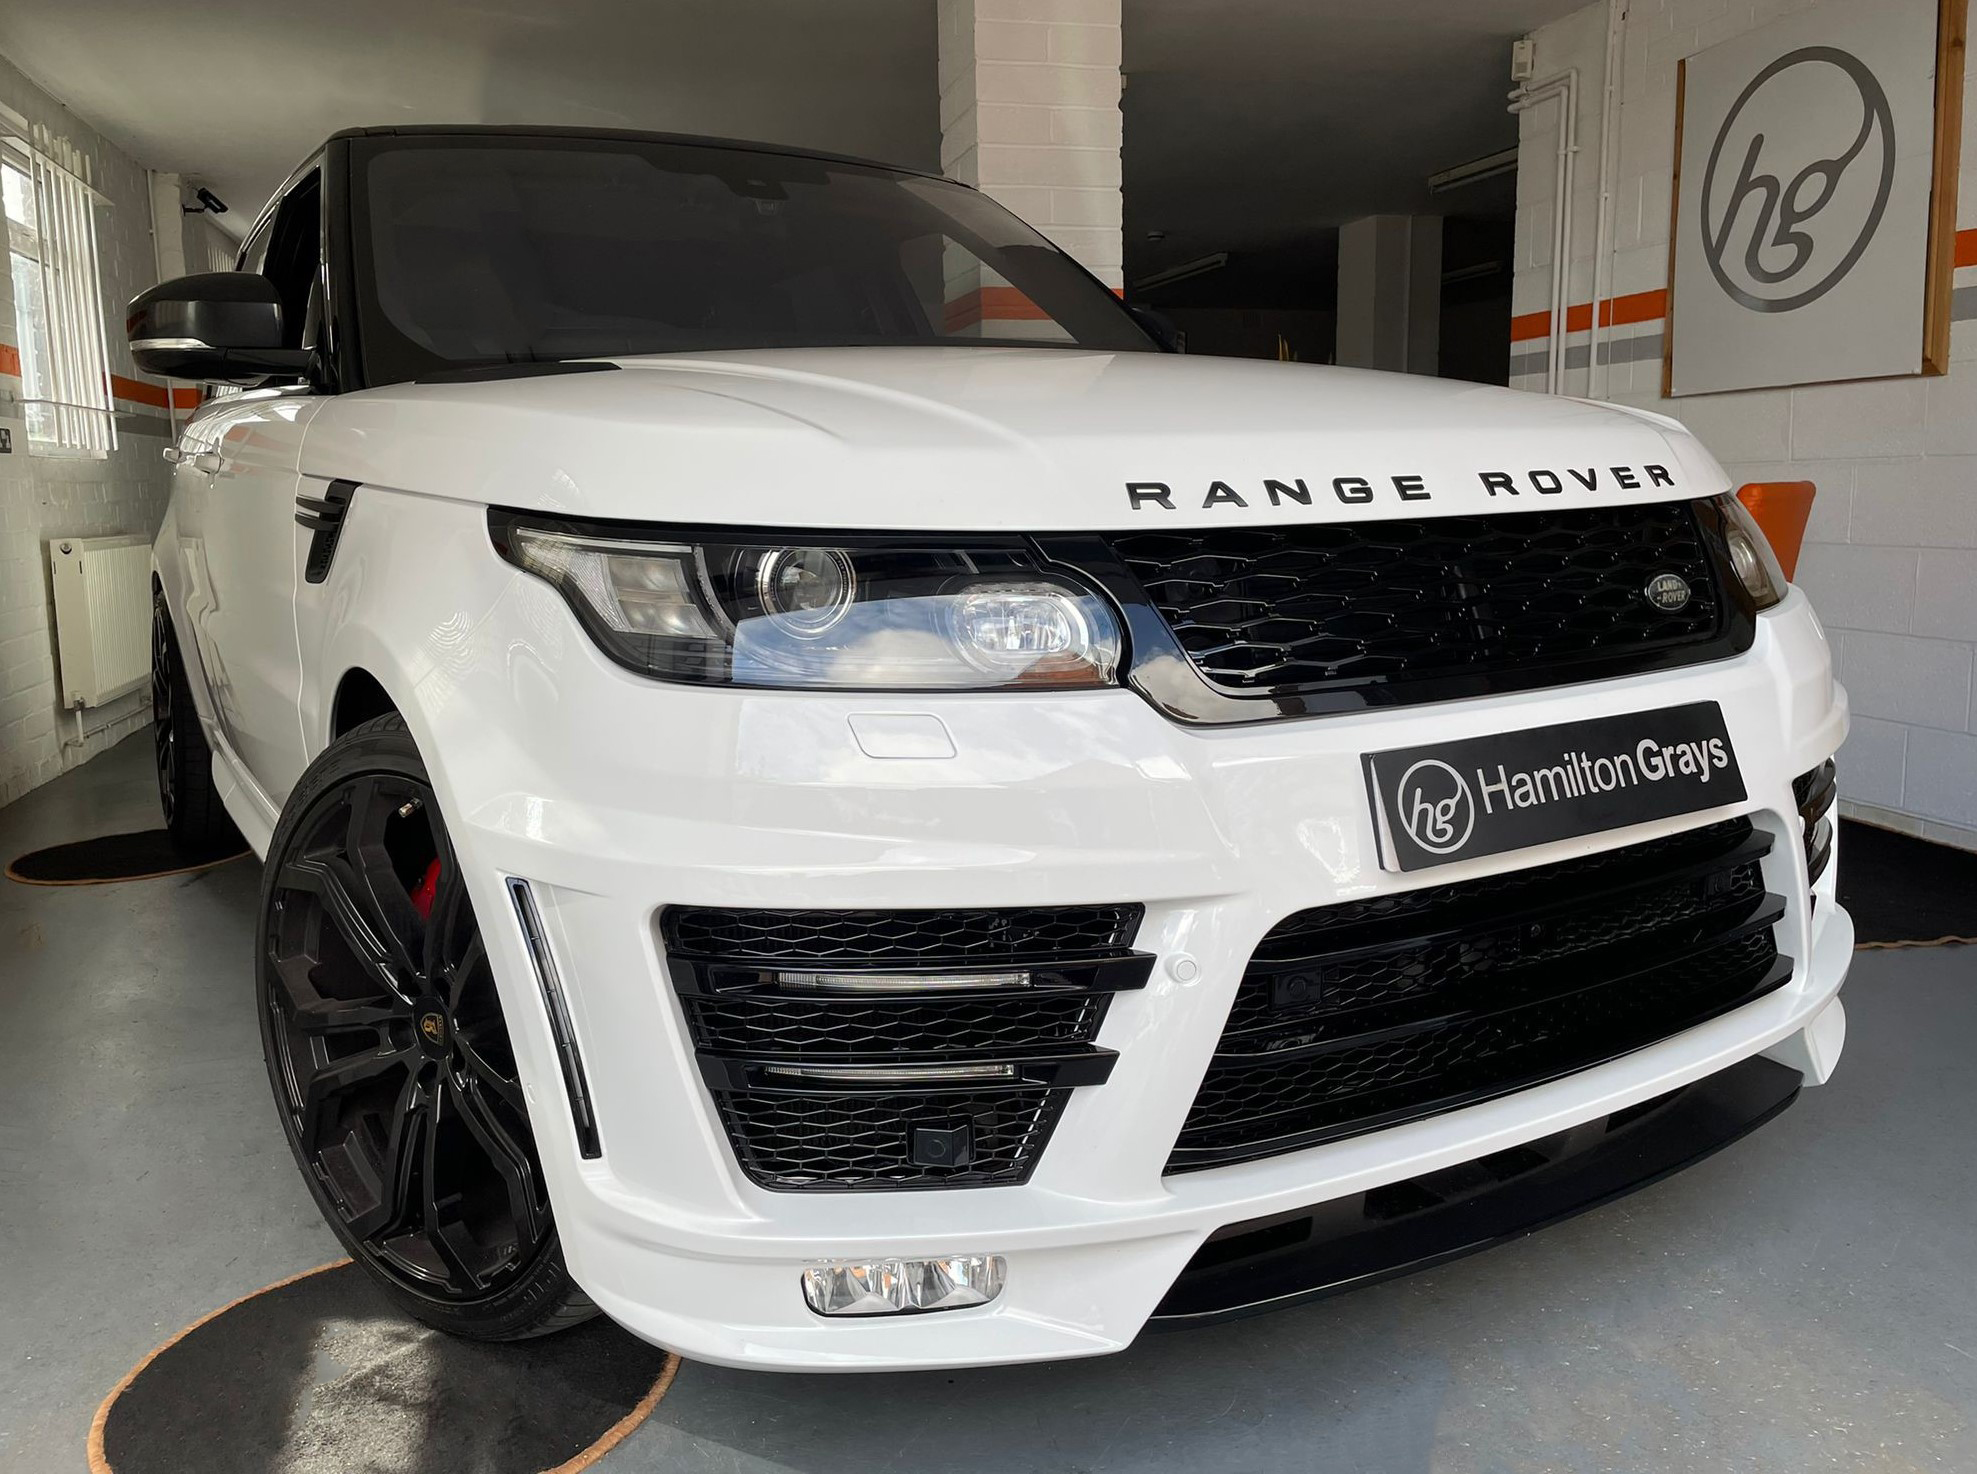 2015 (65) Range Rover Sport 3.0 SD V6 Autobiography Dynamic Auto 4WD. In Polaris White with Black Leather. Full Barugzai Body Kit and Alloys [22”]. 43,451m. FLRSH. Striking Car  (SOLD)